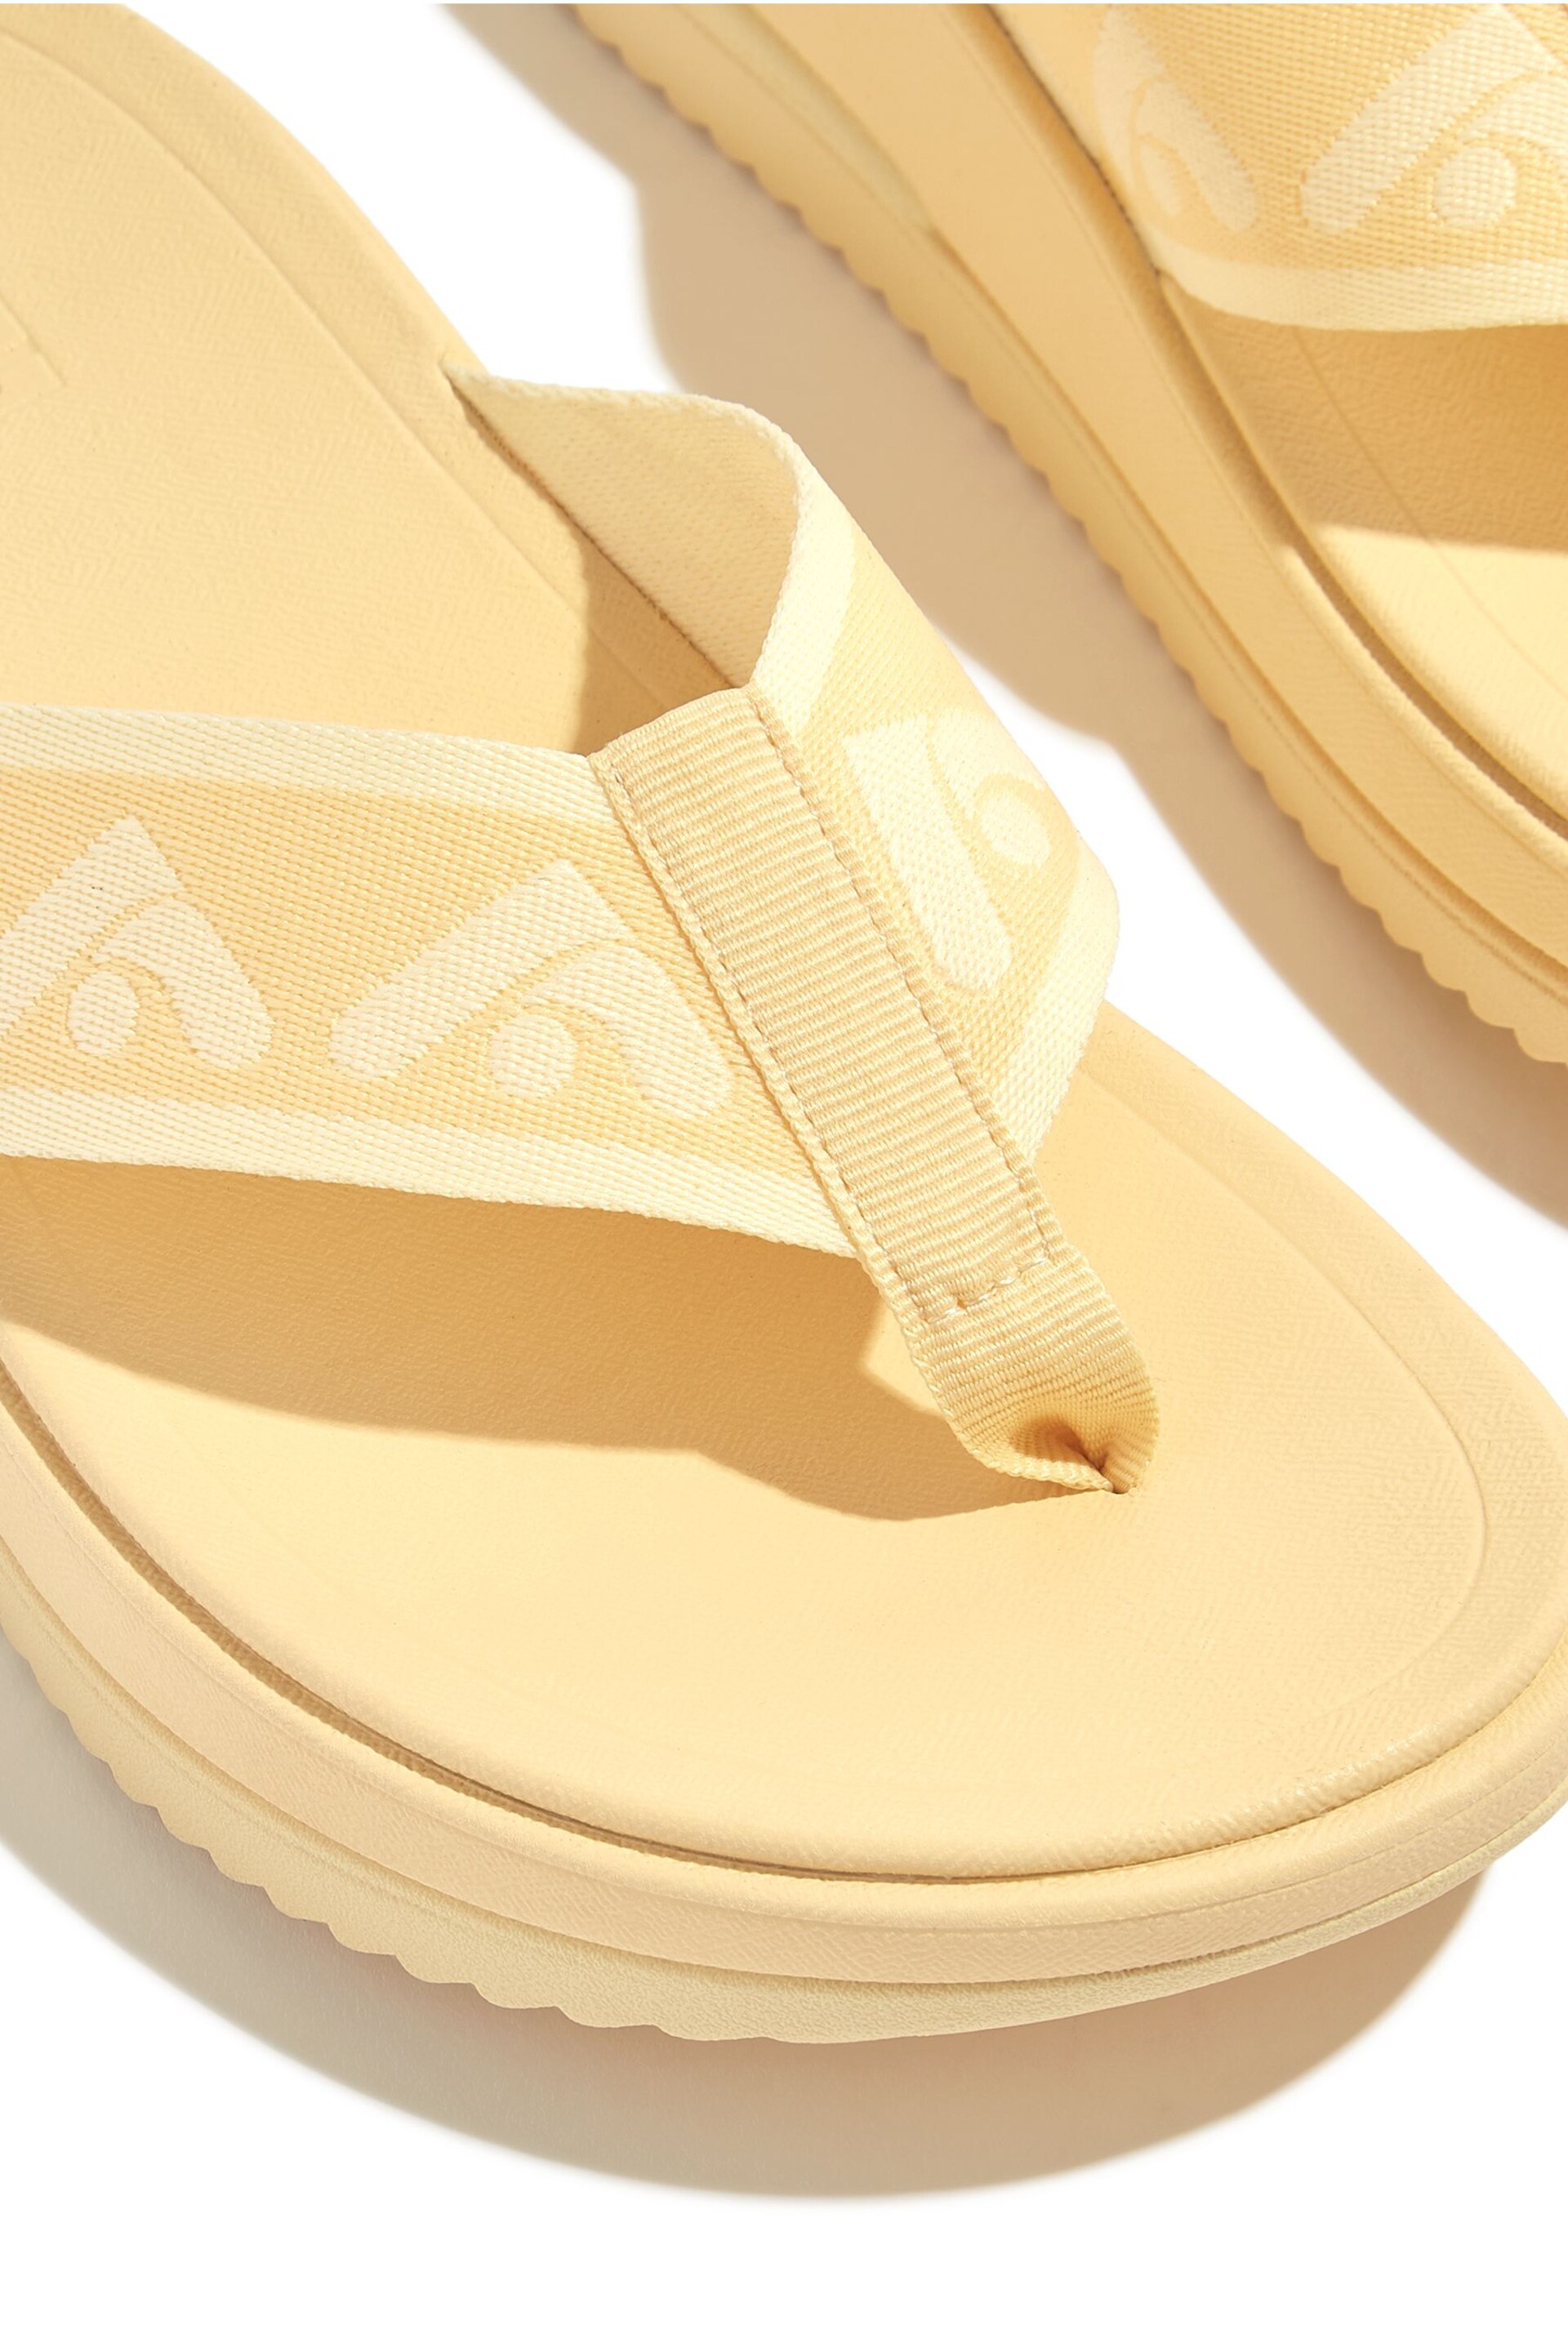 FitFlop Yellow Surff Webbing Toe-Post Sandals - Image 3 of 4